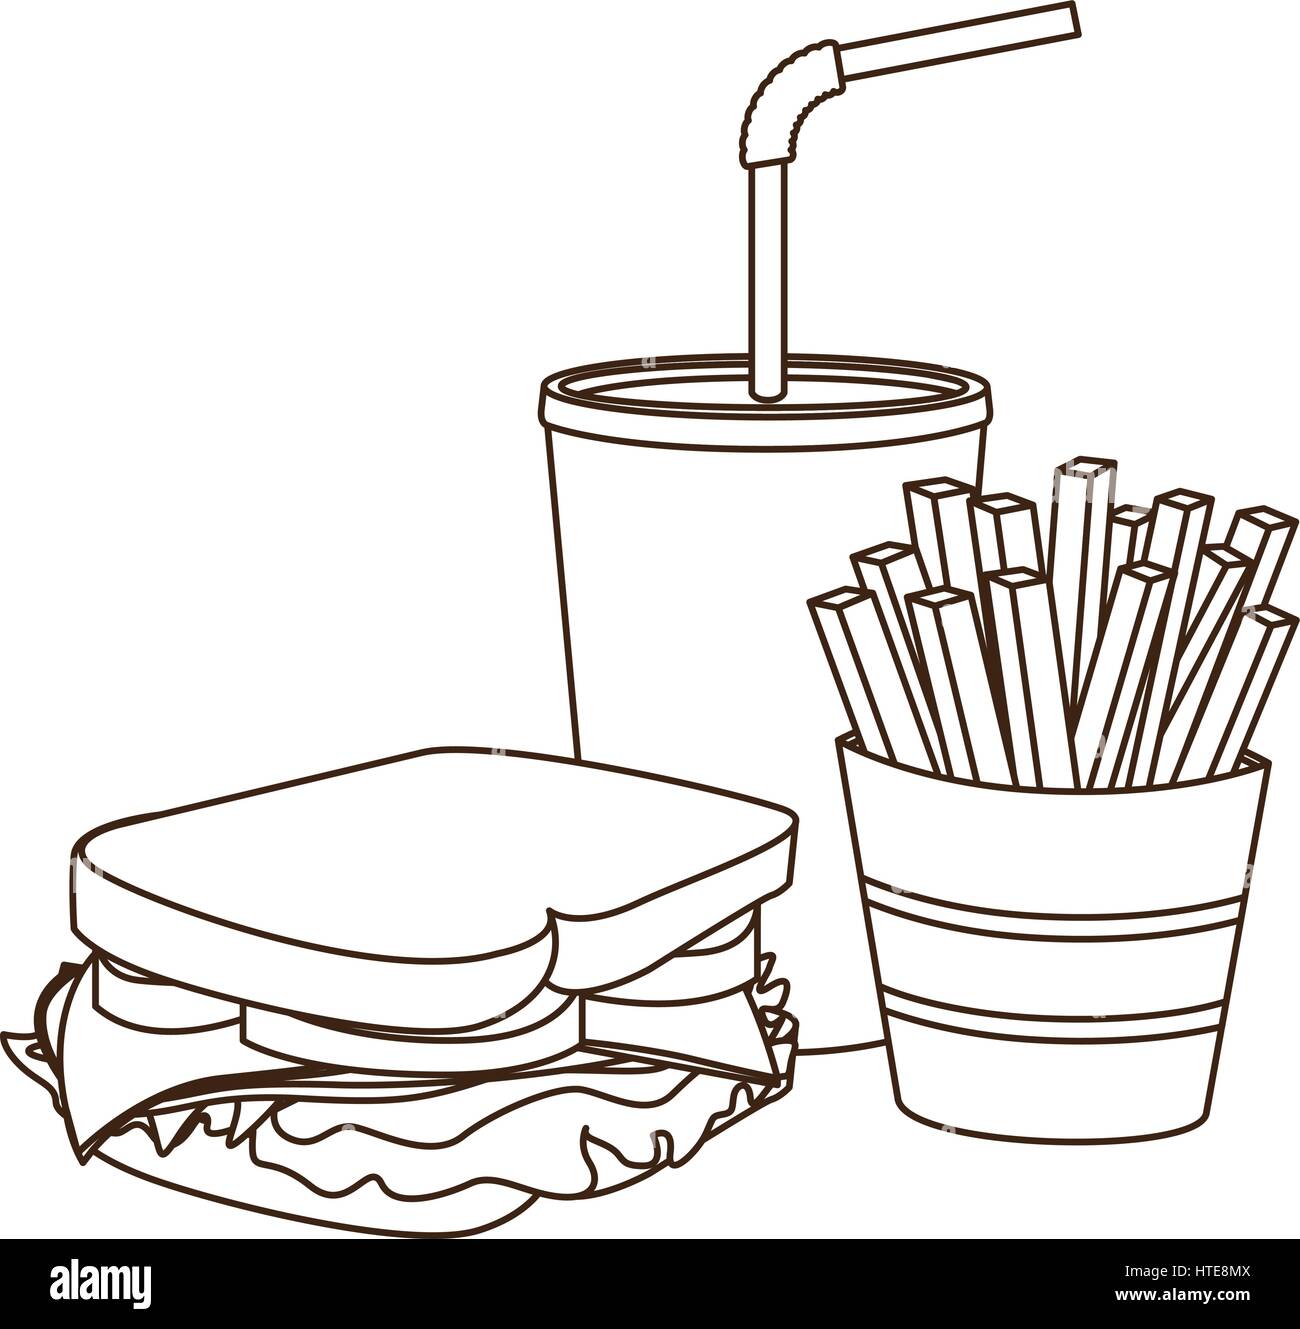 monochrome contour of sandwich with french fries and soda Stock Vector